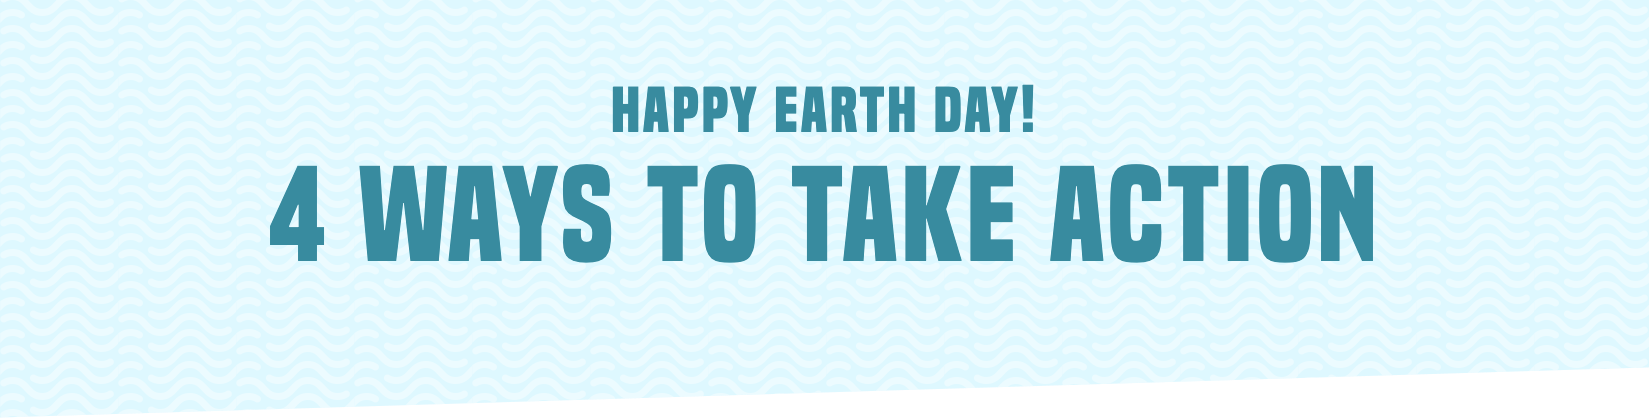 Happy Earth Day! 4 Ways to Take Action